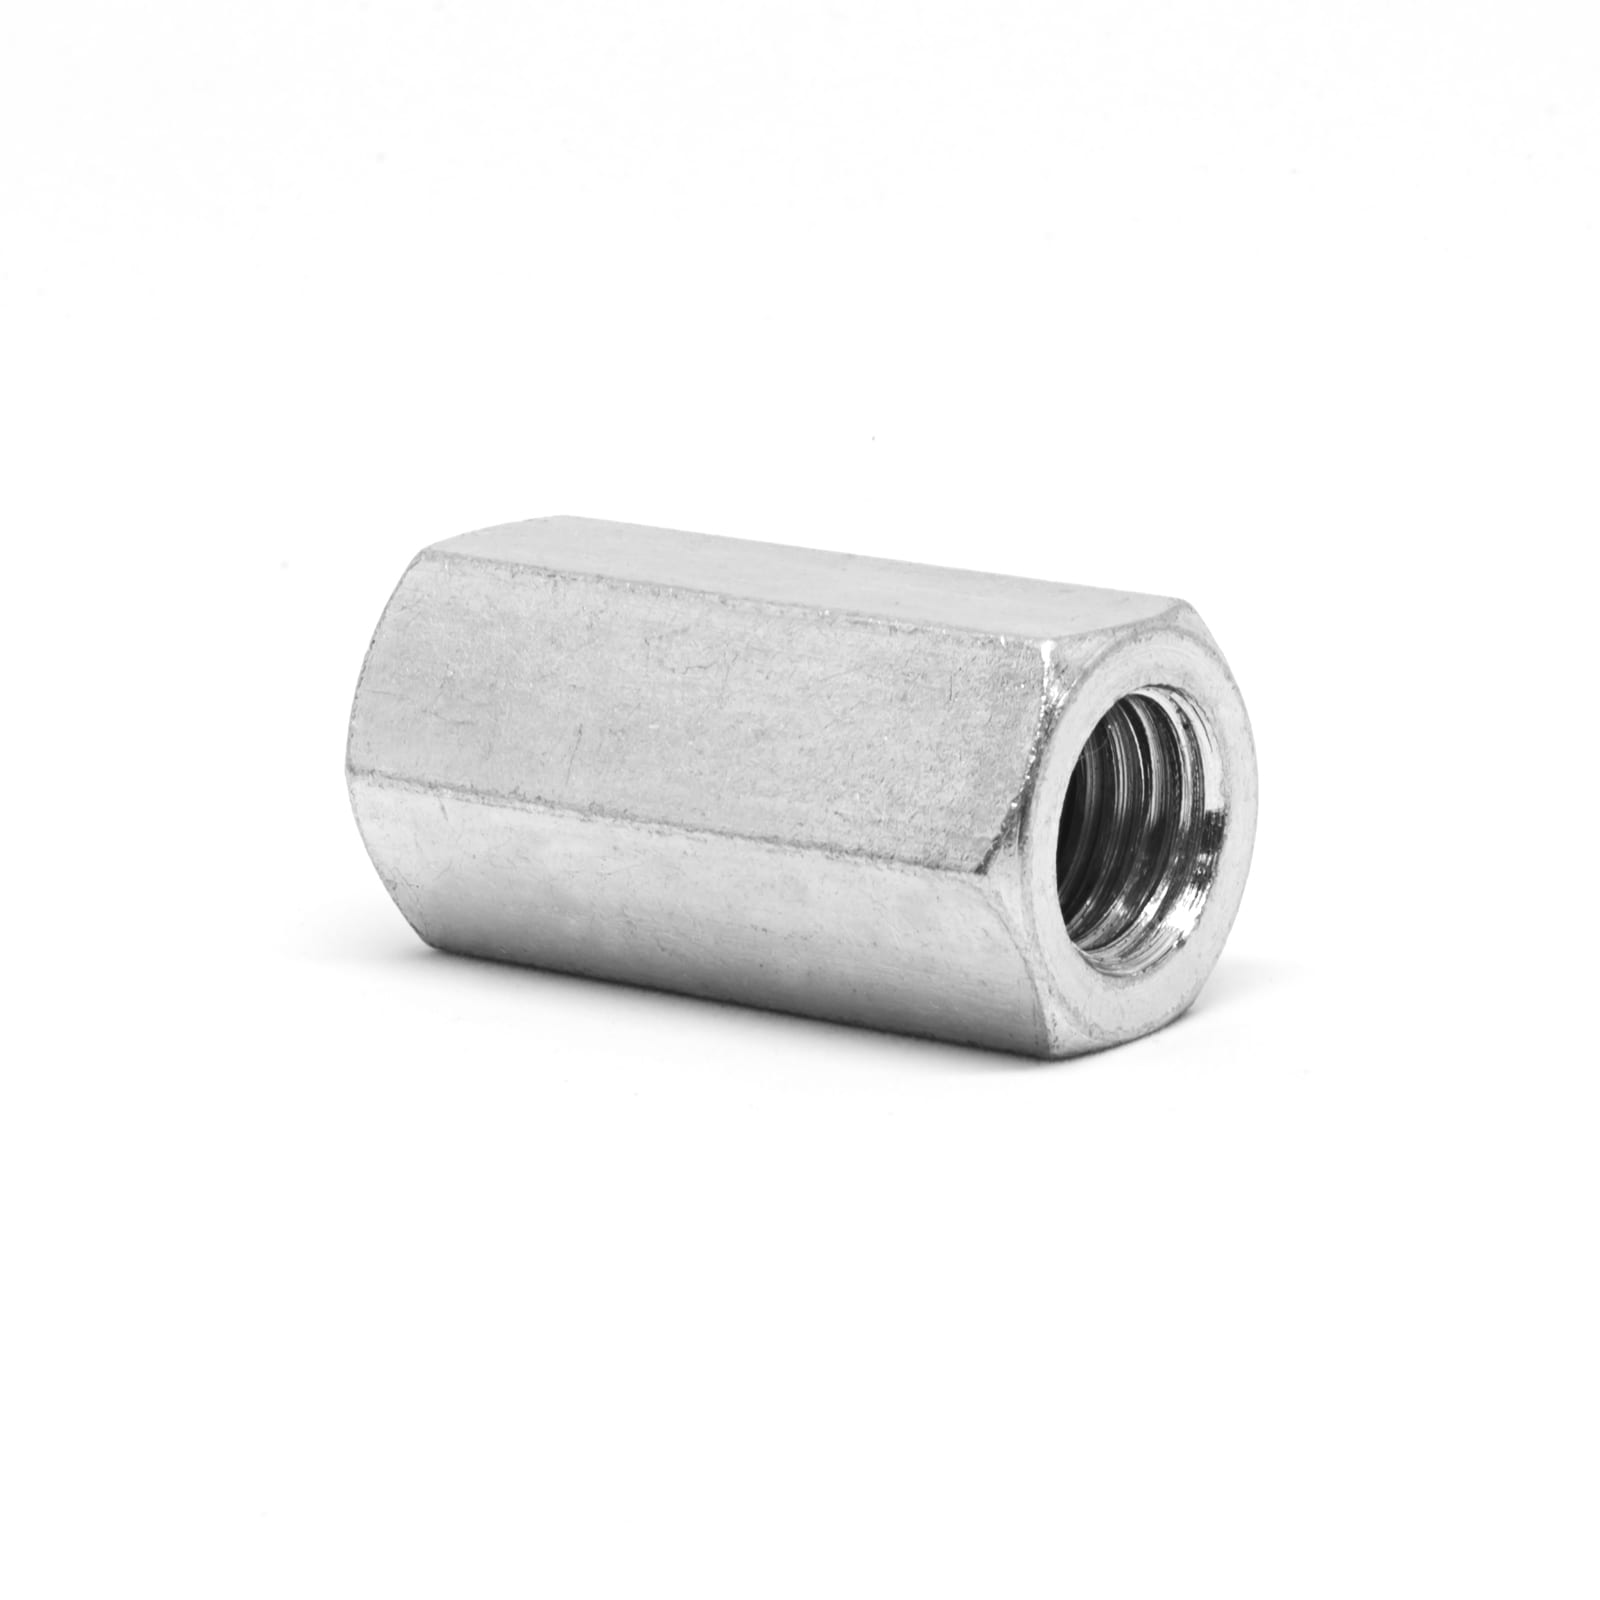 HEX COUPLER 3/16IN ZINC PLATED